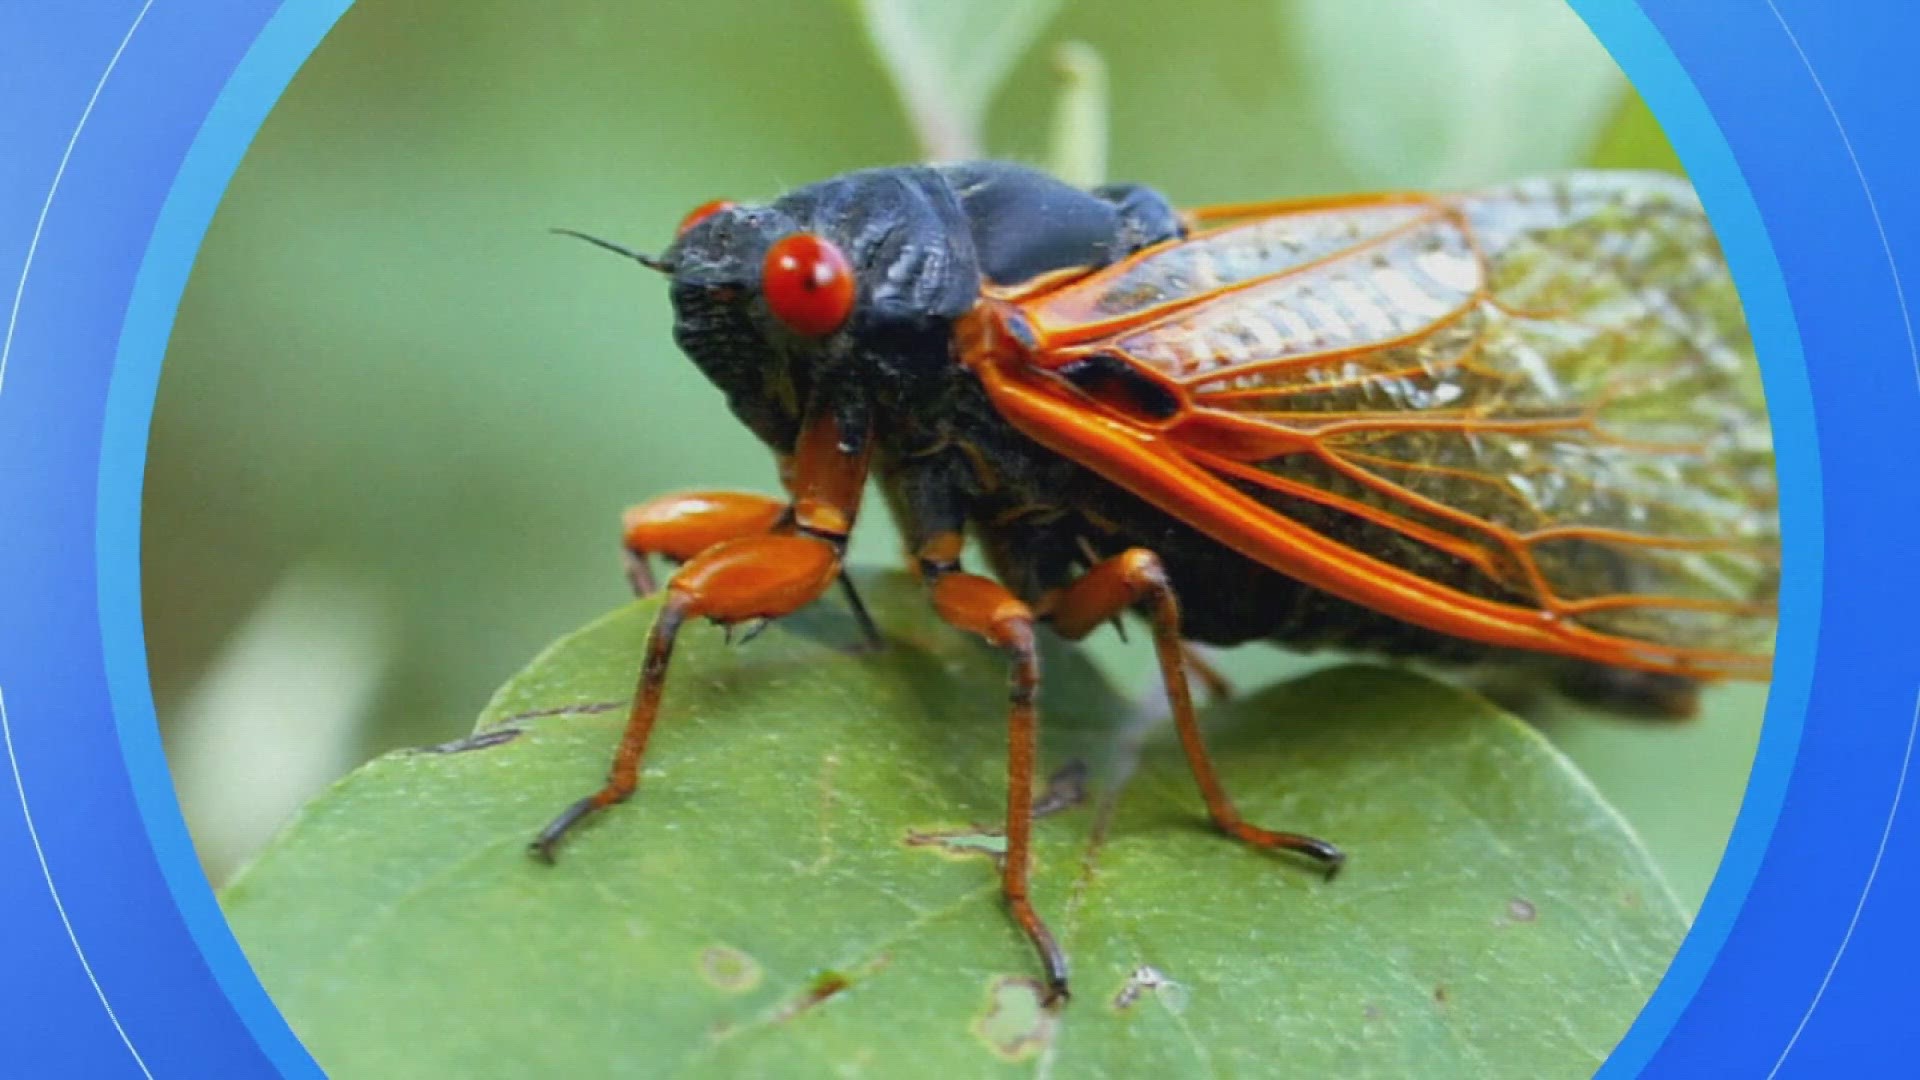 Scientists say in a few weeks, the brood of cicadas that emerges every 13 years and the brood that emerges every 17 years are about to pop out of the ground at once.